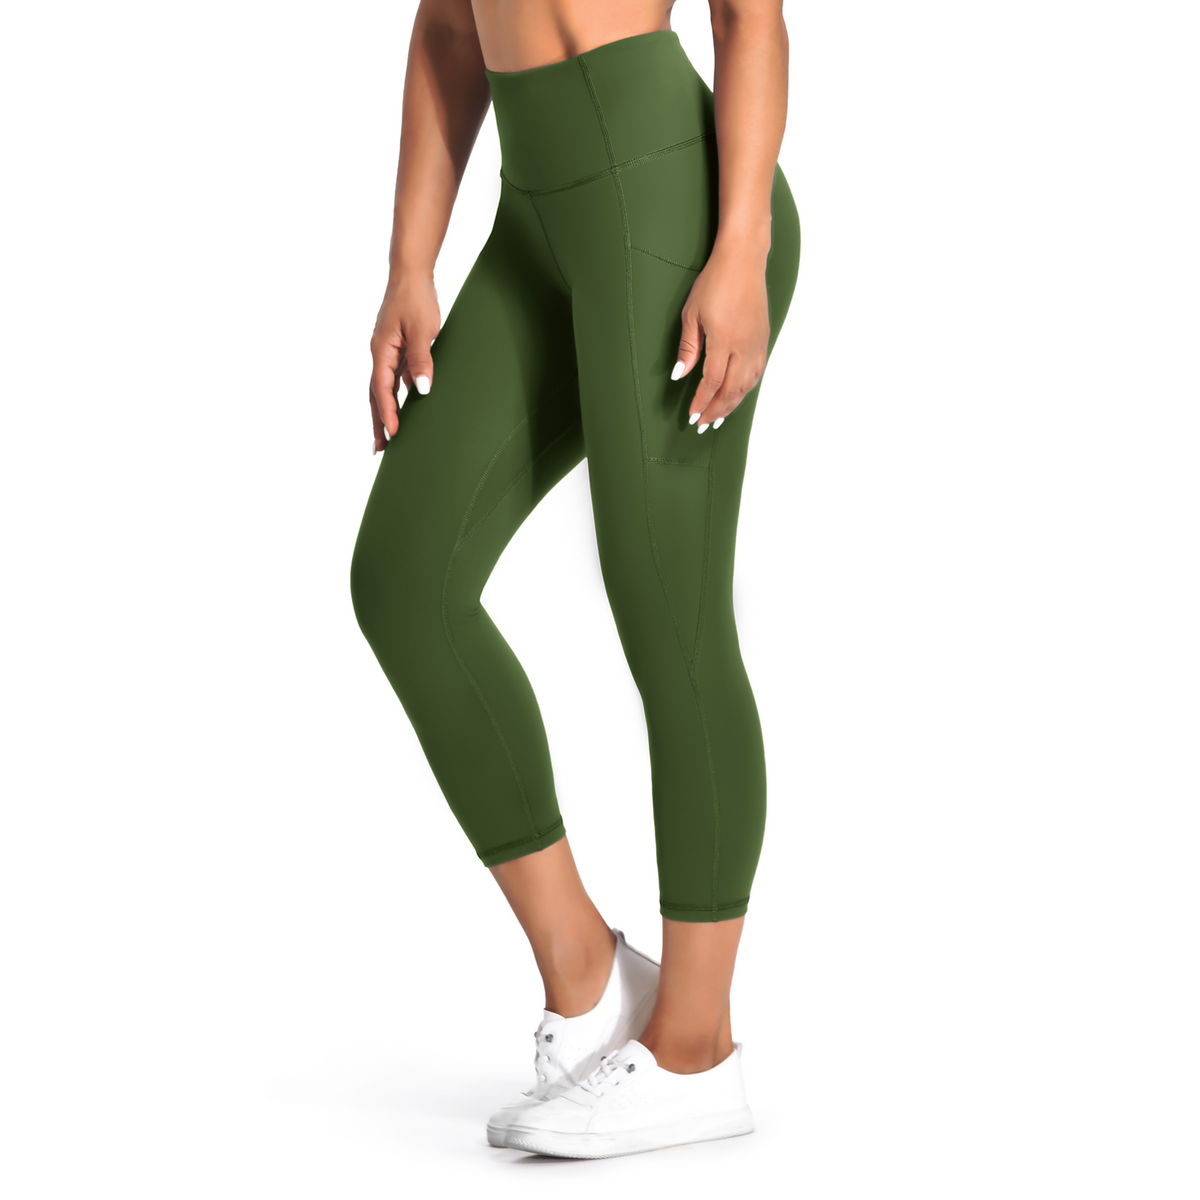 WOMEN'S HIGH WAIST LEGGINGS WITH POCKET IS3 - CABRALLY